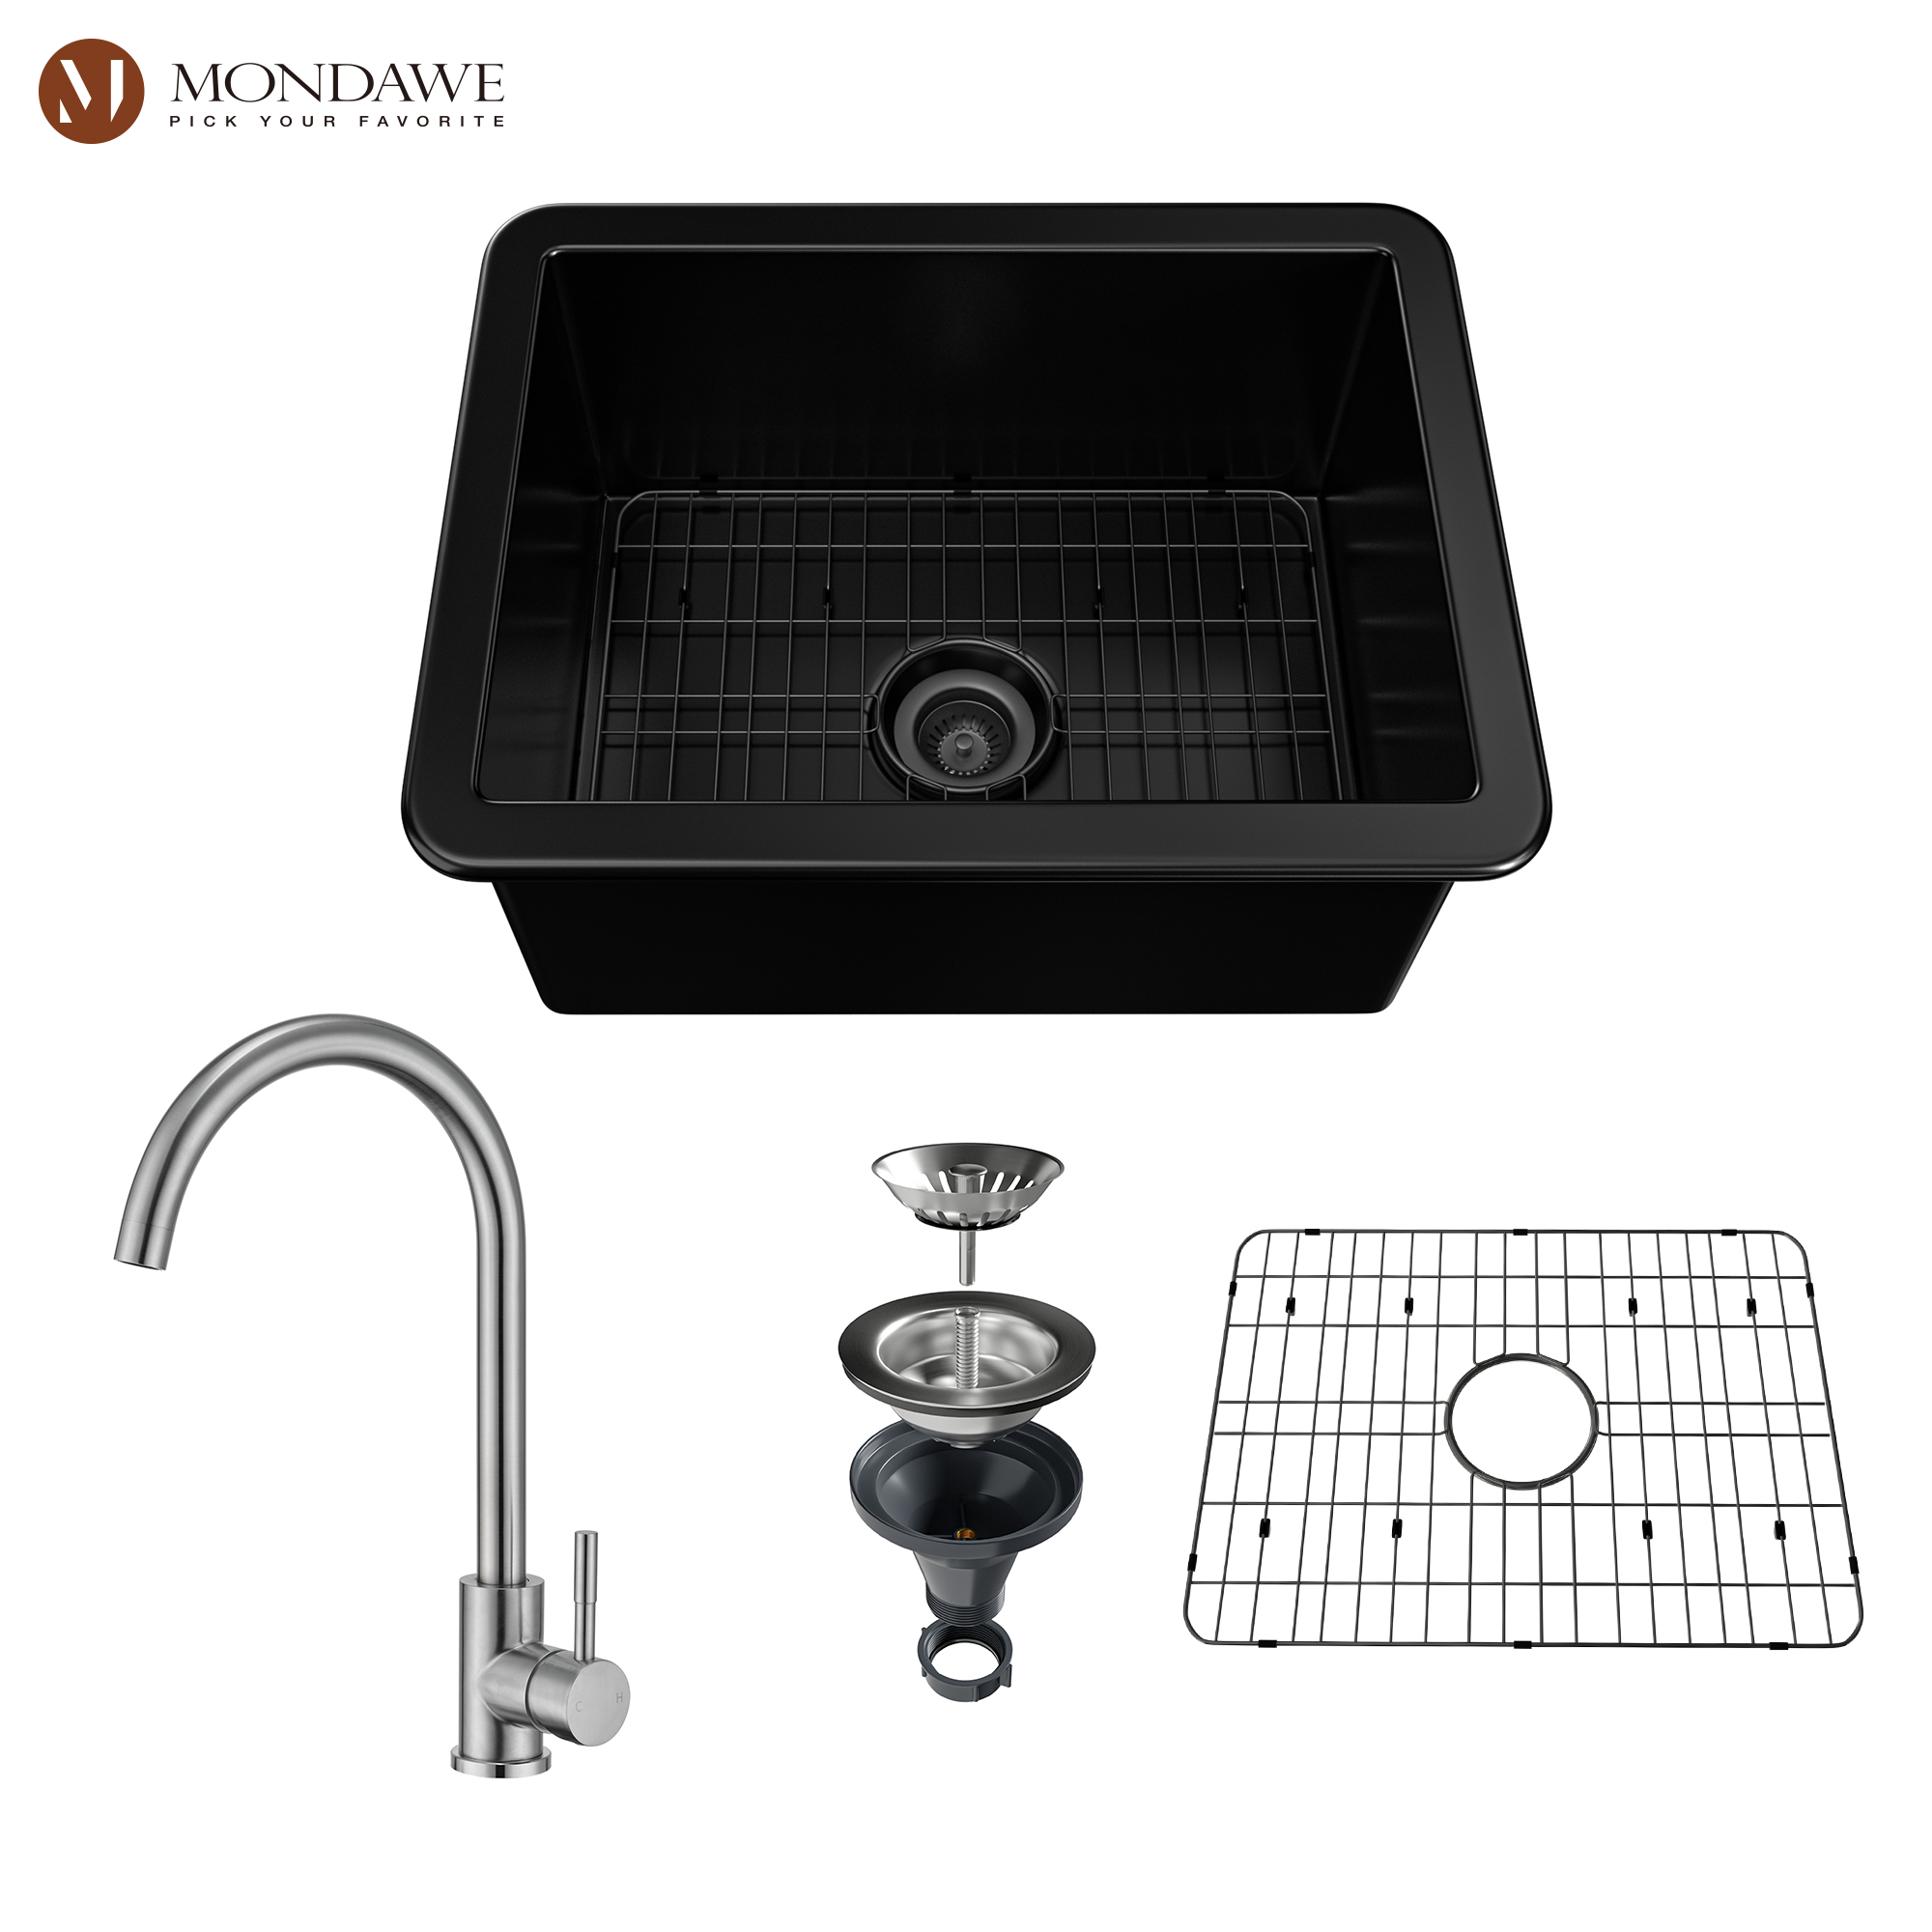 Undermount 24 in. matte black single bowl fireclay kitchen sink comes with high-arc kitchen faucet-Arrisea